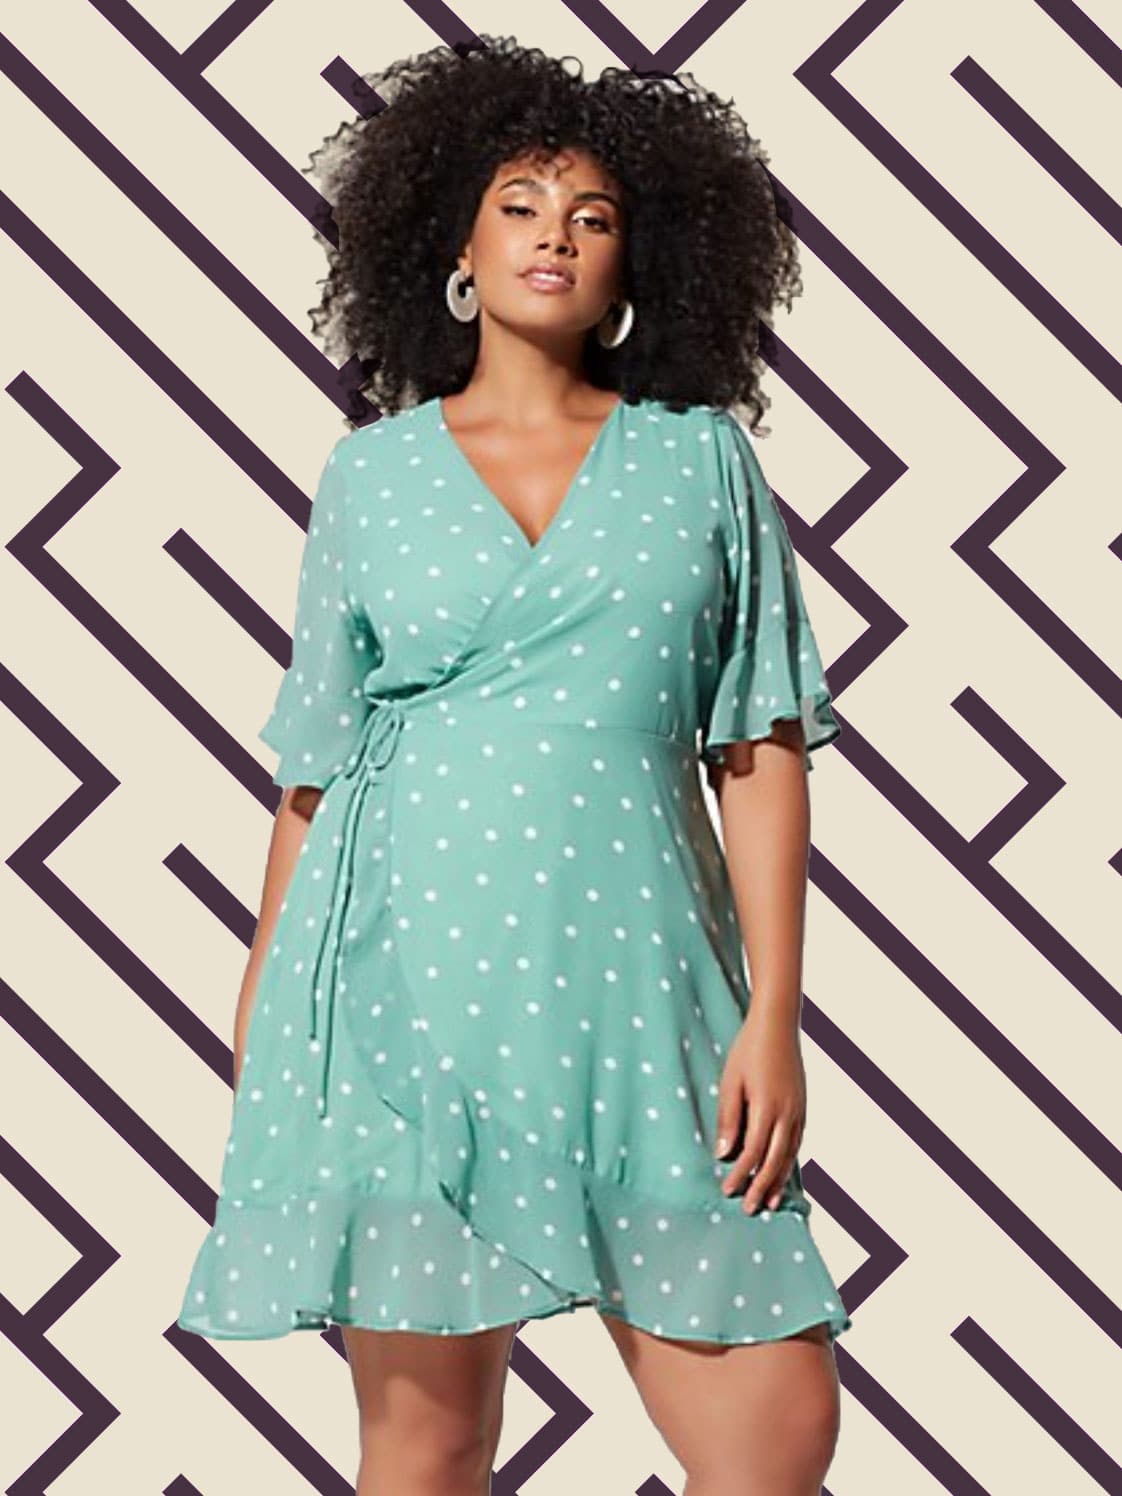 Oh Hey, Curvy Girl! You’ll Love These Ultra Pretty Dresses Under $150